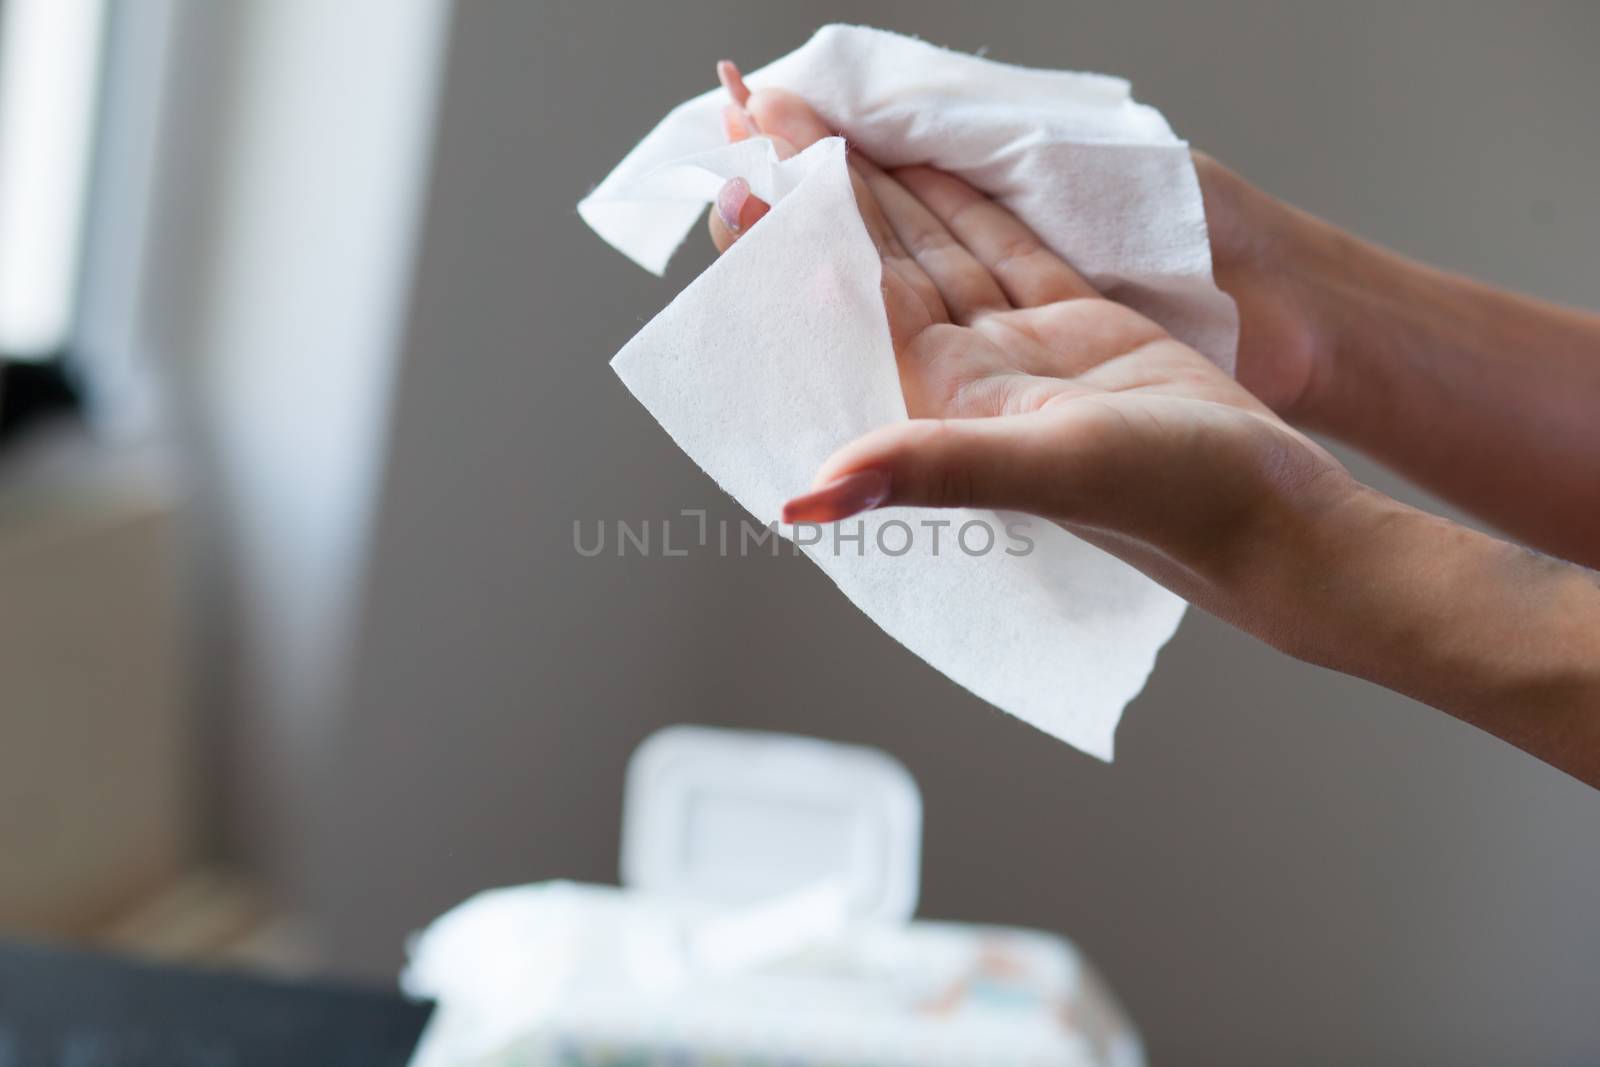 Woman with long nails clean hands with wet wipes, blurred package in background